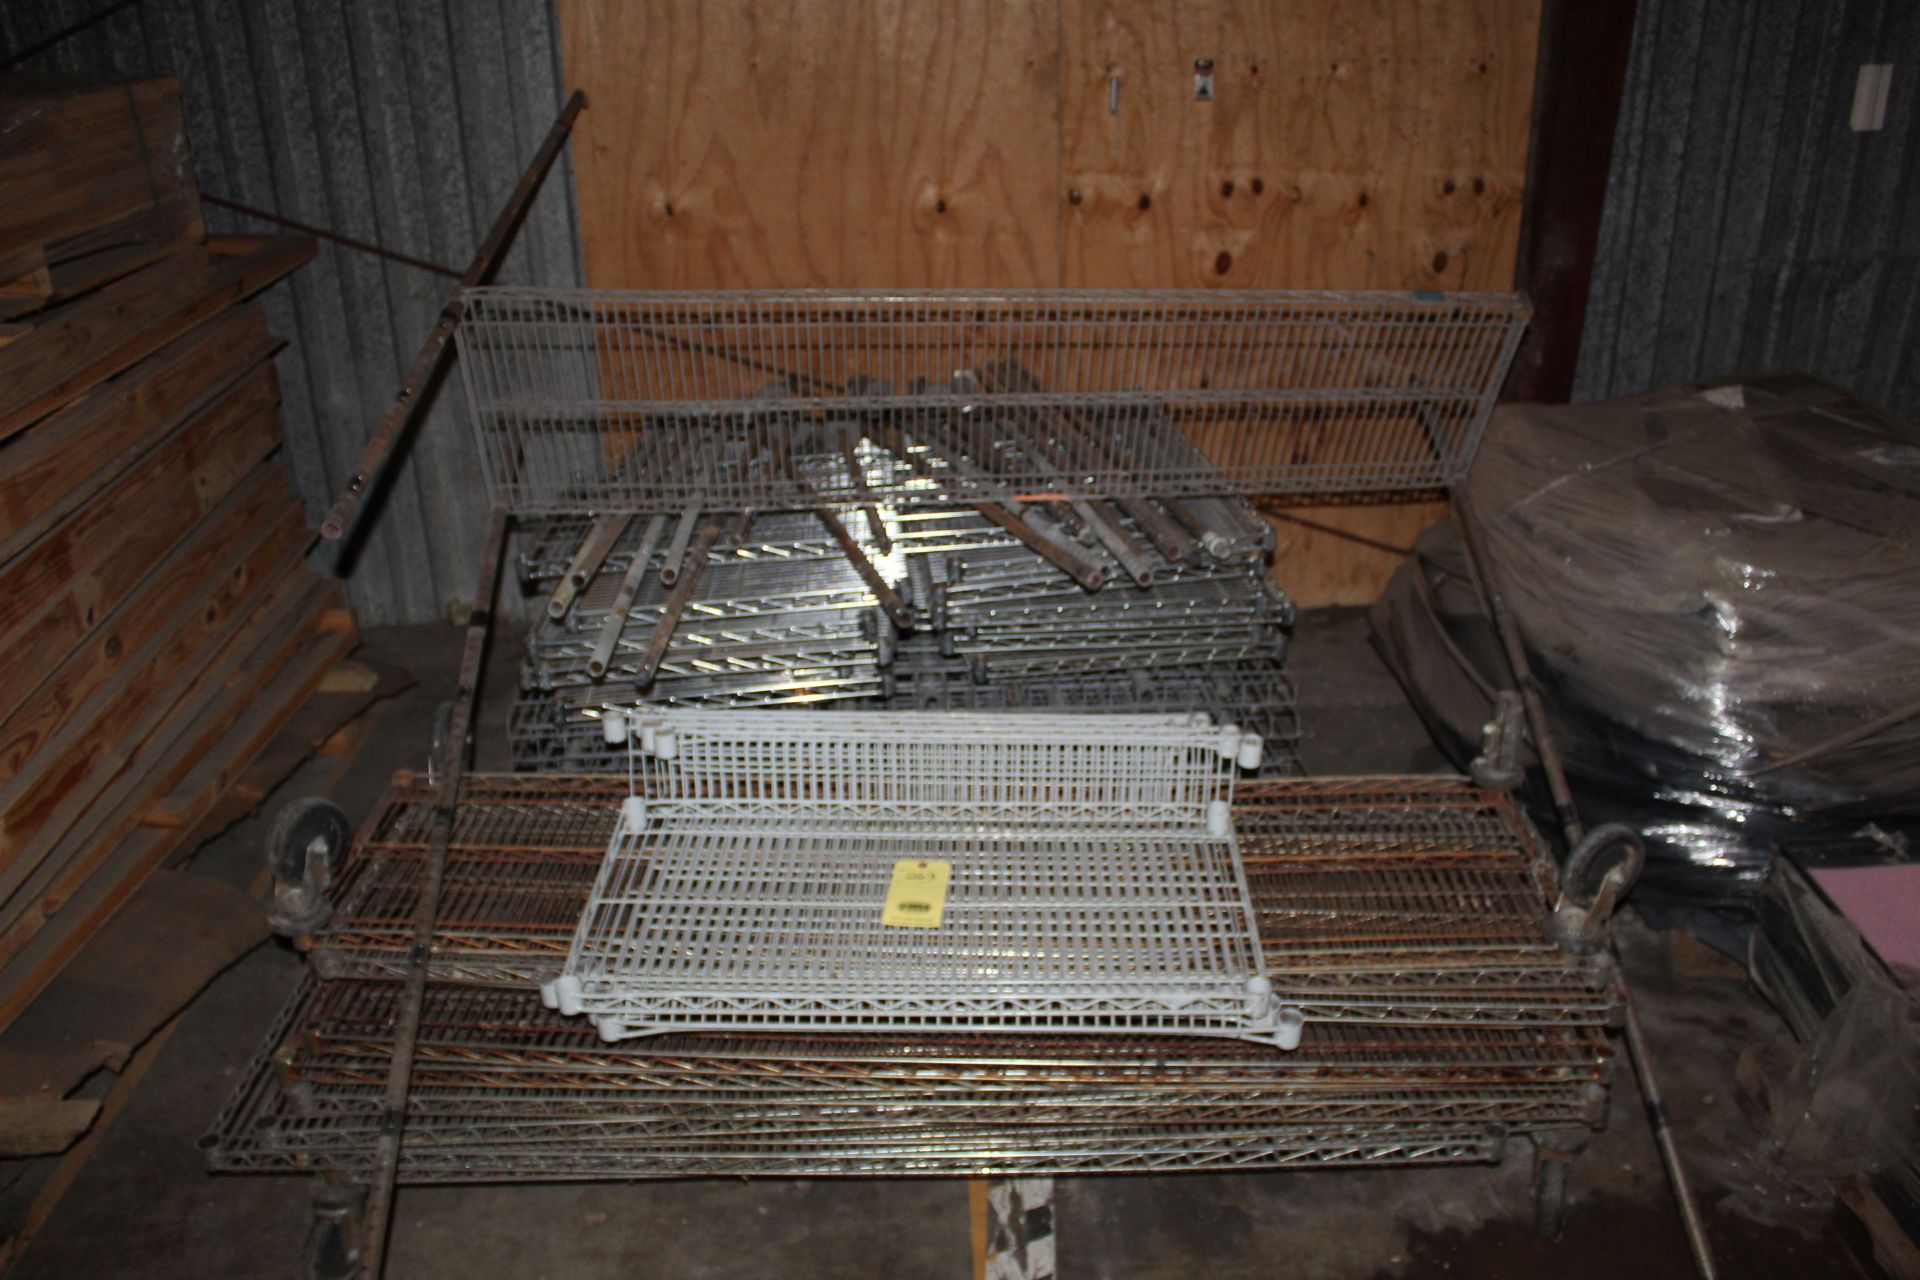 LOT OF WIRE RACK SHELVING (Located at: Accurate, Inc., 1200 East 4th Street, Taylor, TX 76574)